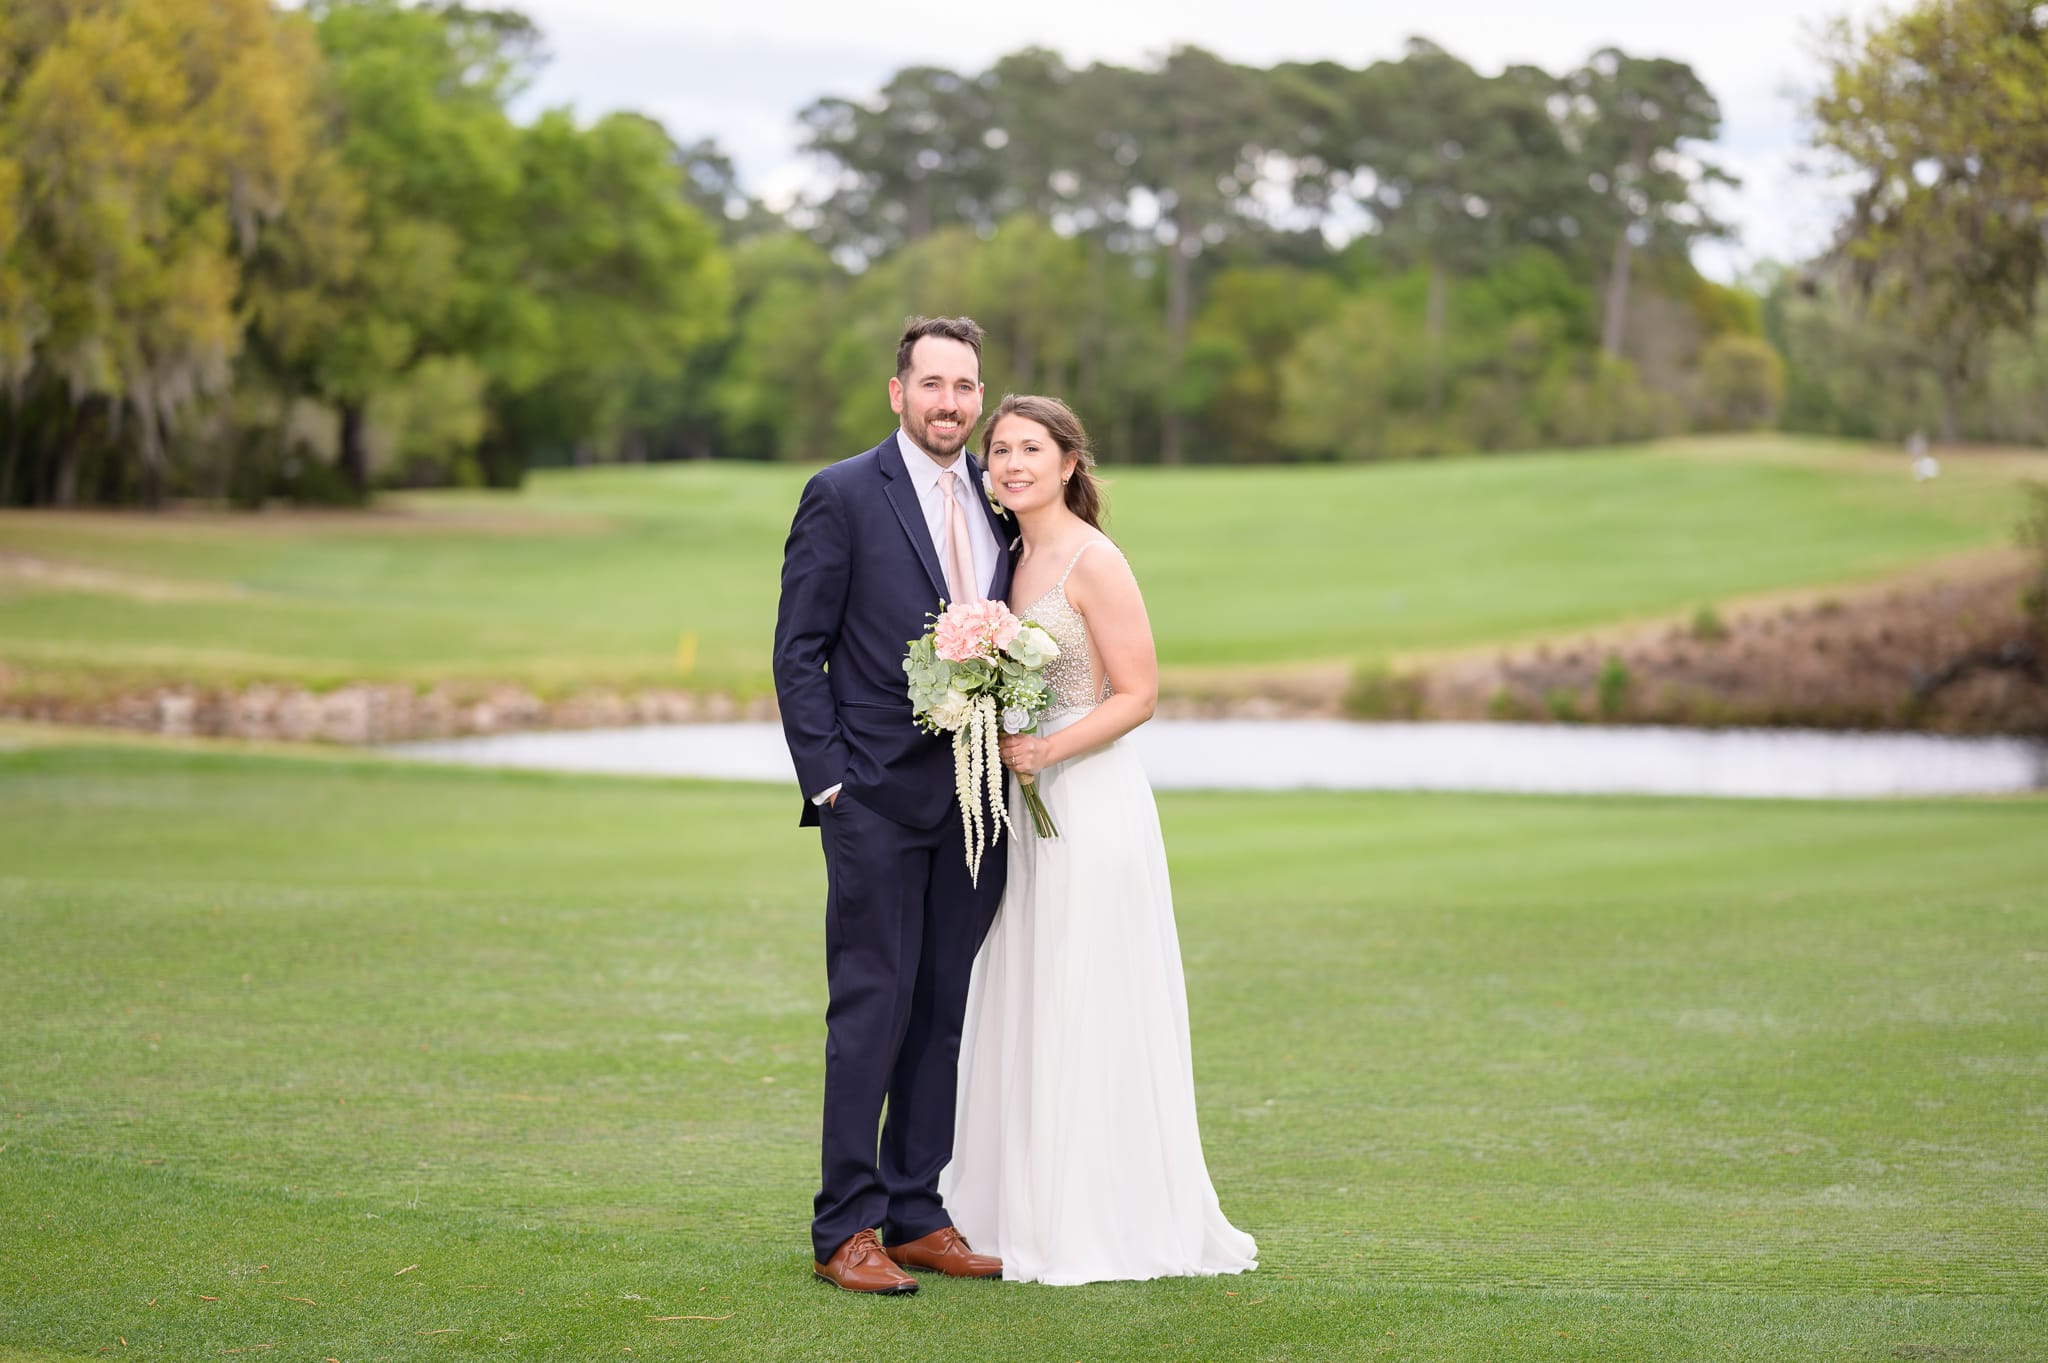 Bride and groom on the golf course - Caledonia Golf & Fish Club